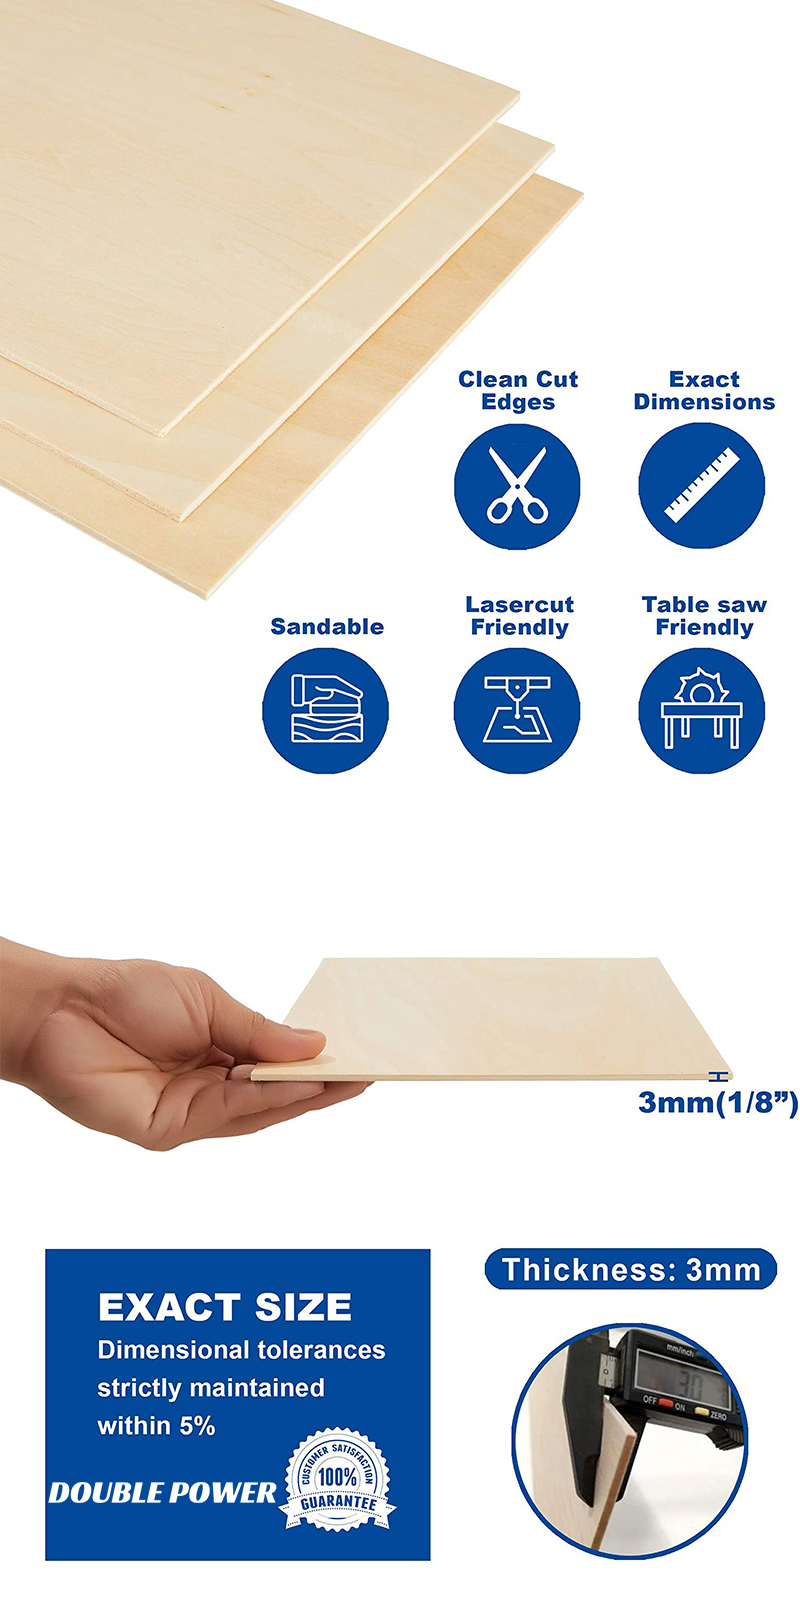 1.5mm basswood sheets